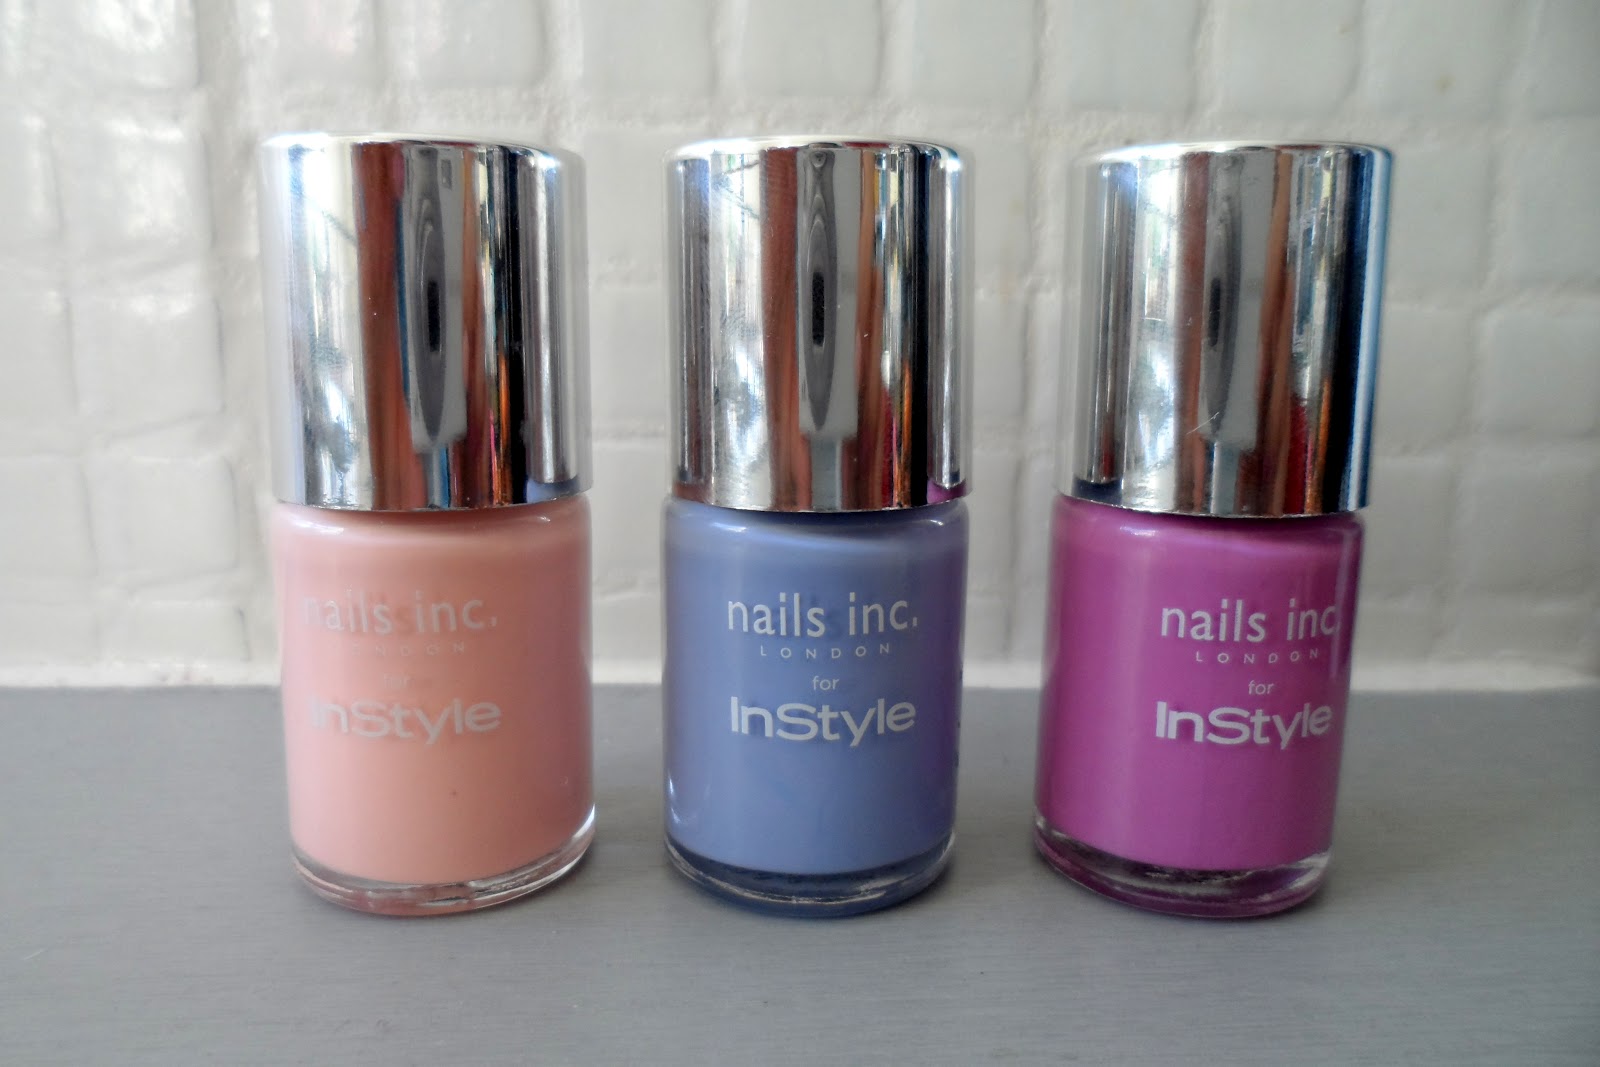 Nails Inc free polish Instyle Magazine offer 2012 - Bluebell, Peach Sorbet